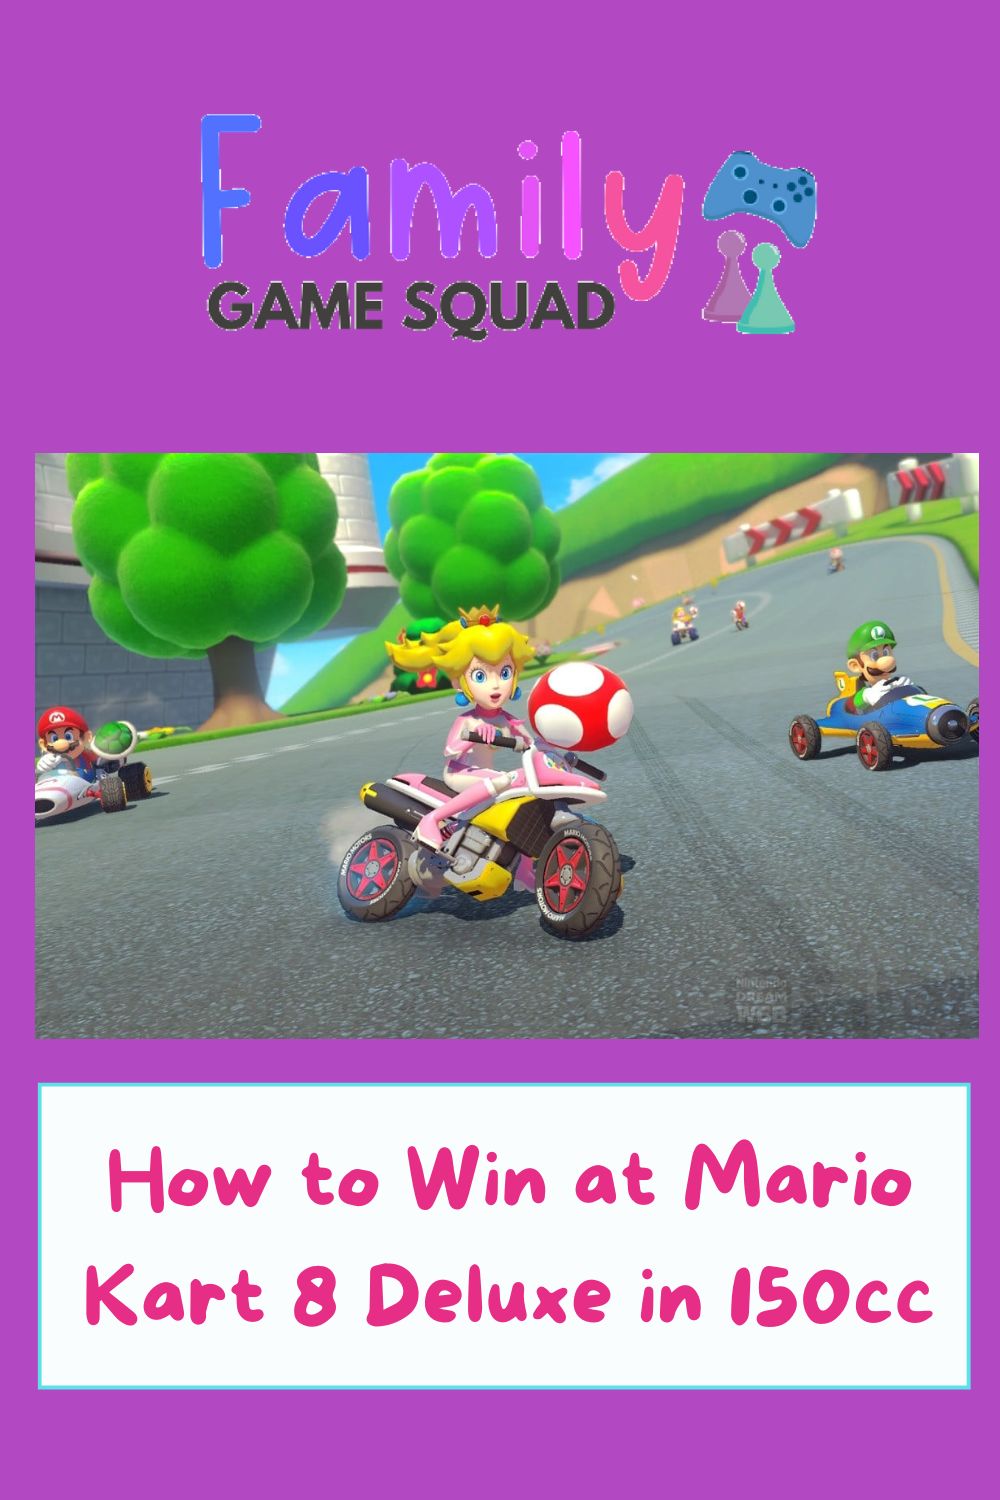 How to Win at Mario Kart 8 Deluxe in 150cc